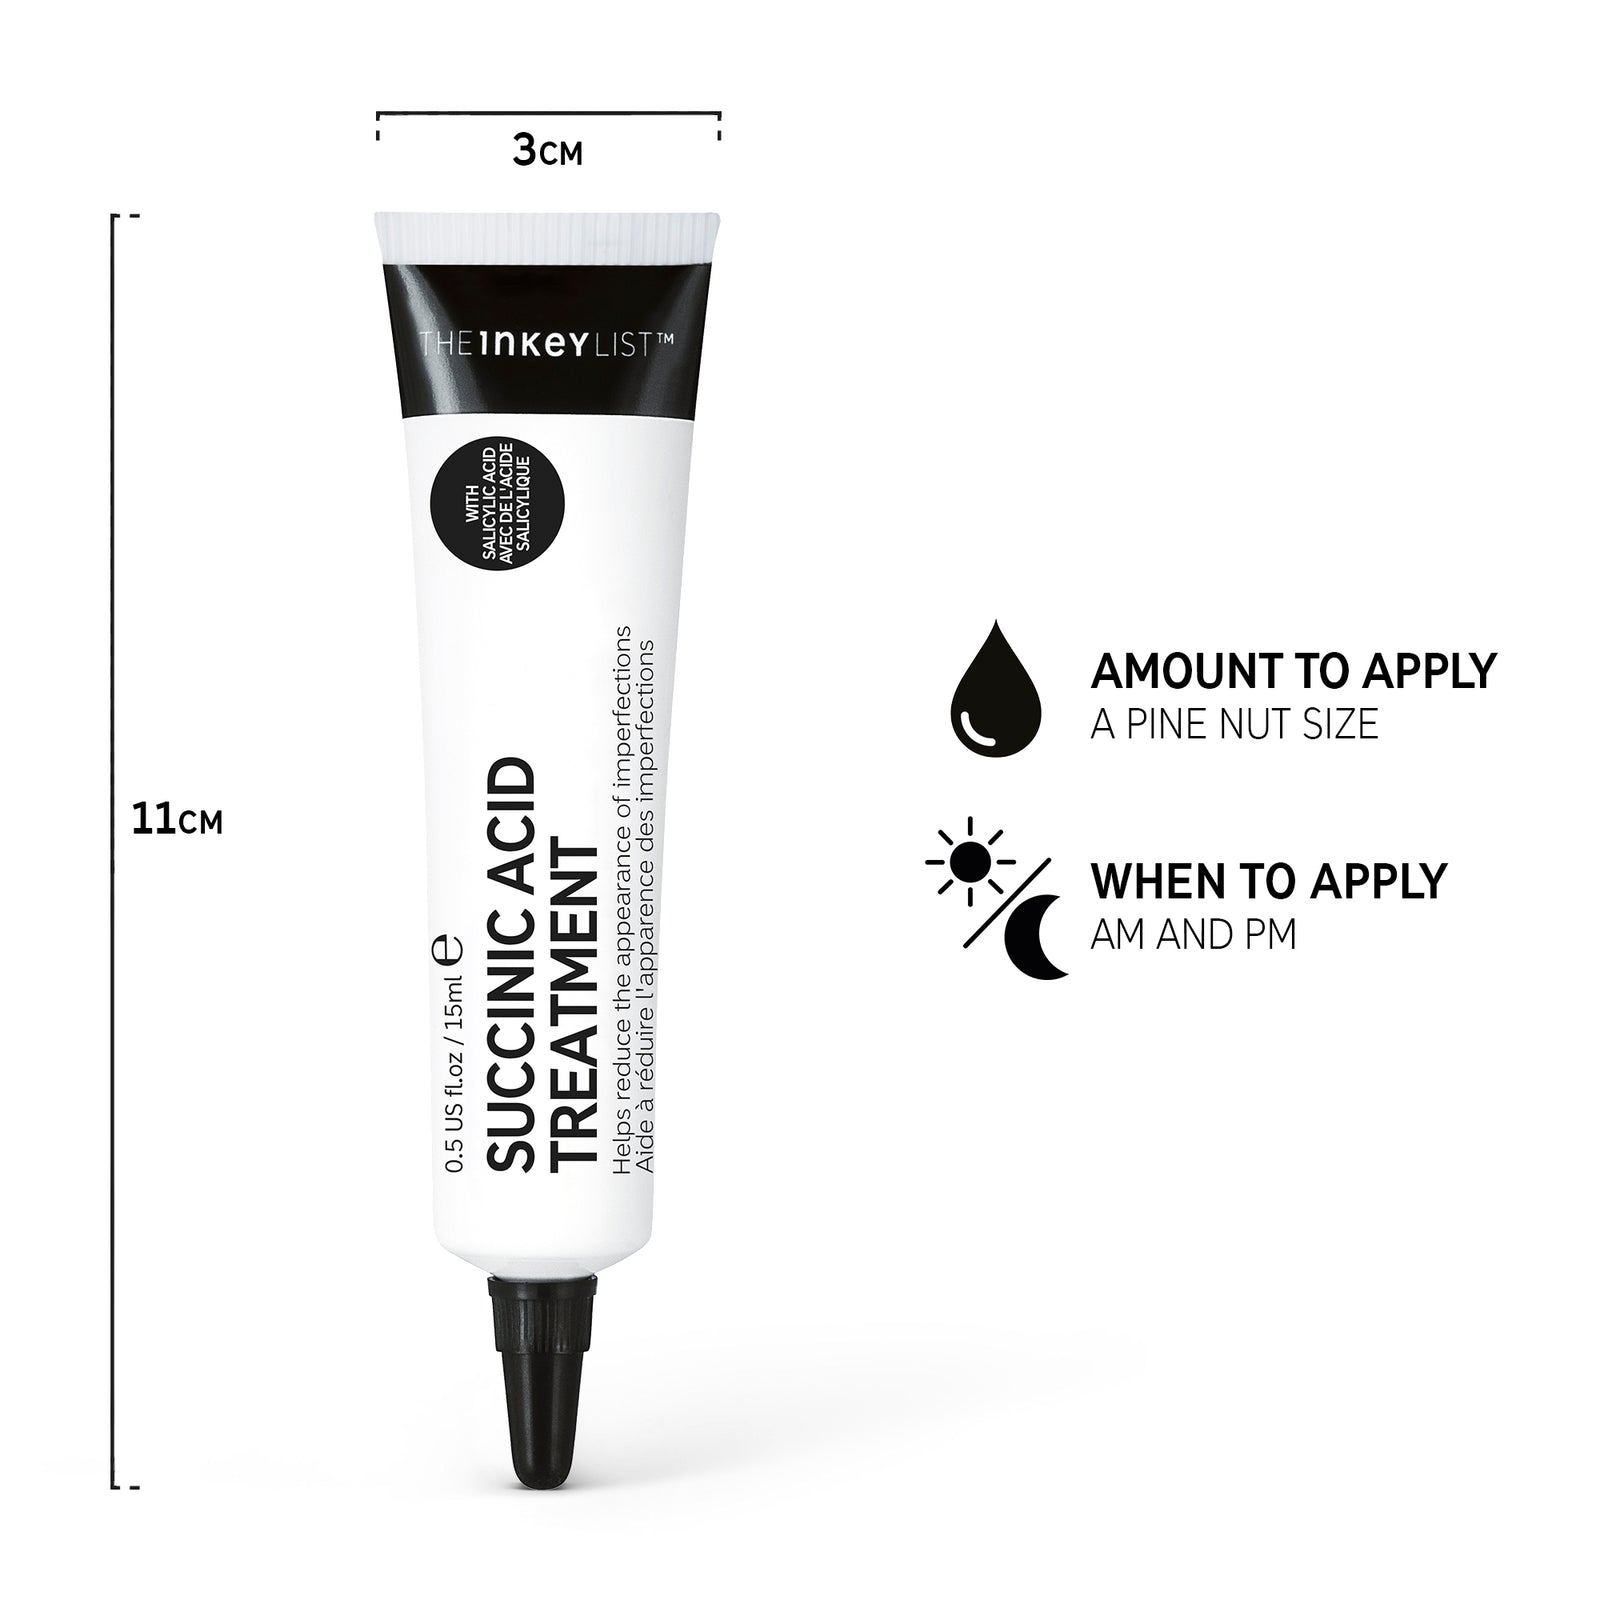 Succinic Acid Acne Treatment pack shot annotated with bottle dimensions and amount to apply (a pine nut size) and when to apply (AM and PM)